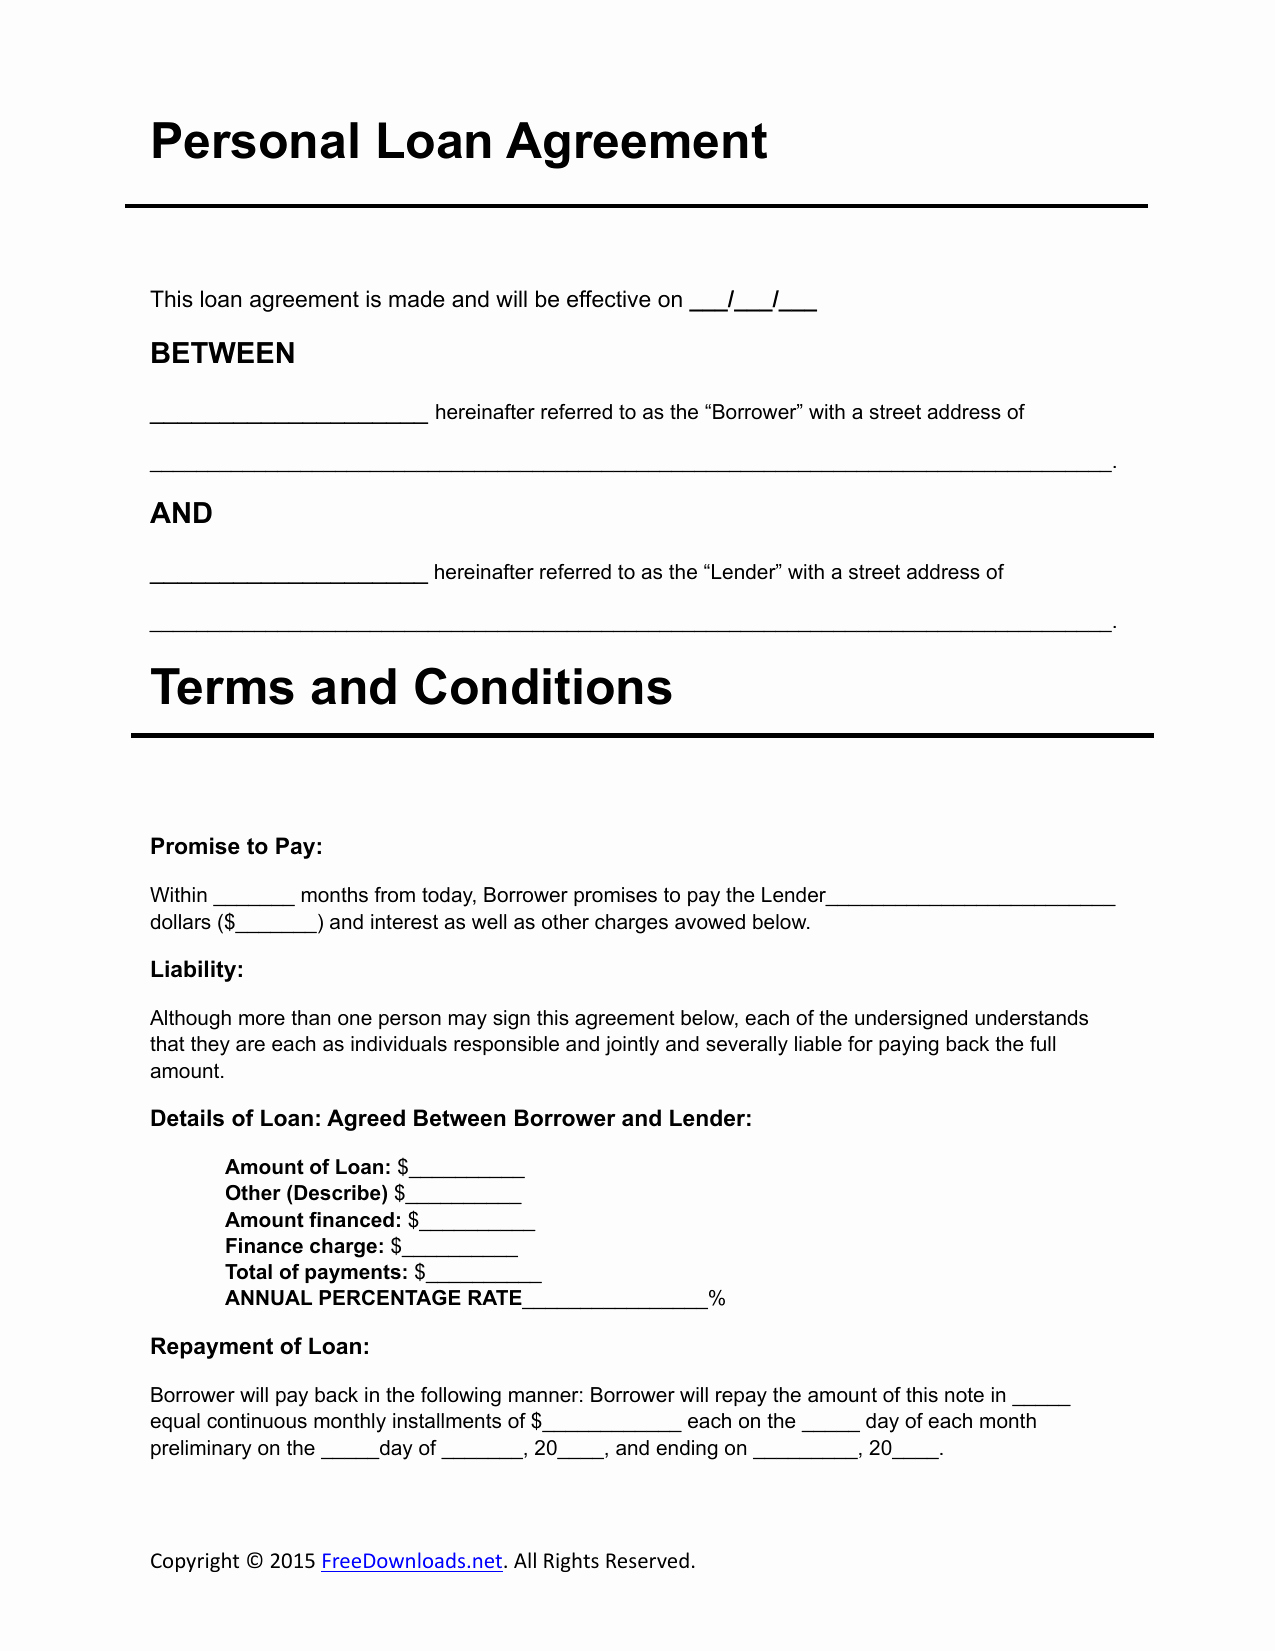 Loan Contract Template Free Best Of Download Personal Loan Agreement Template Pdf